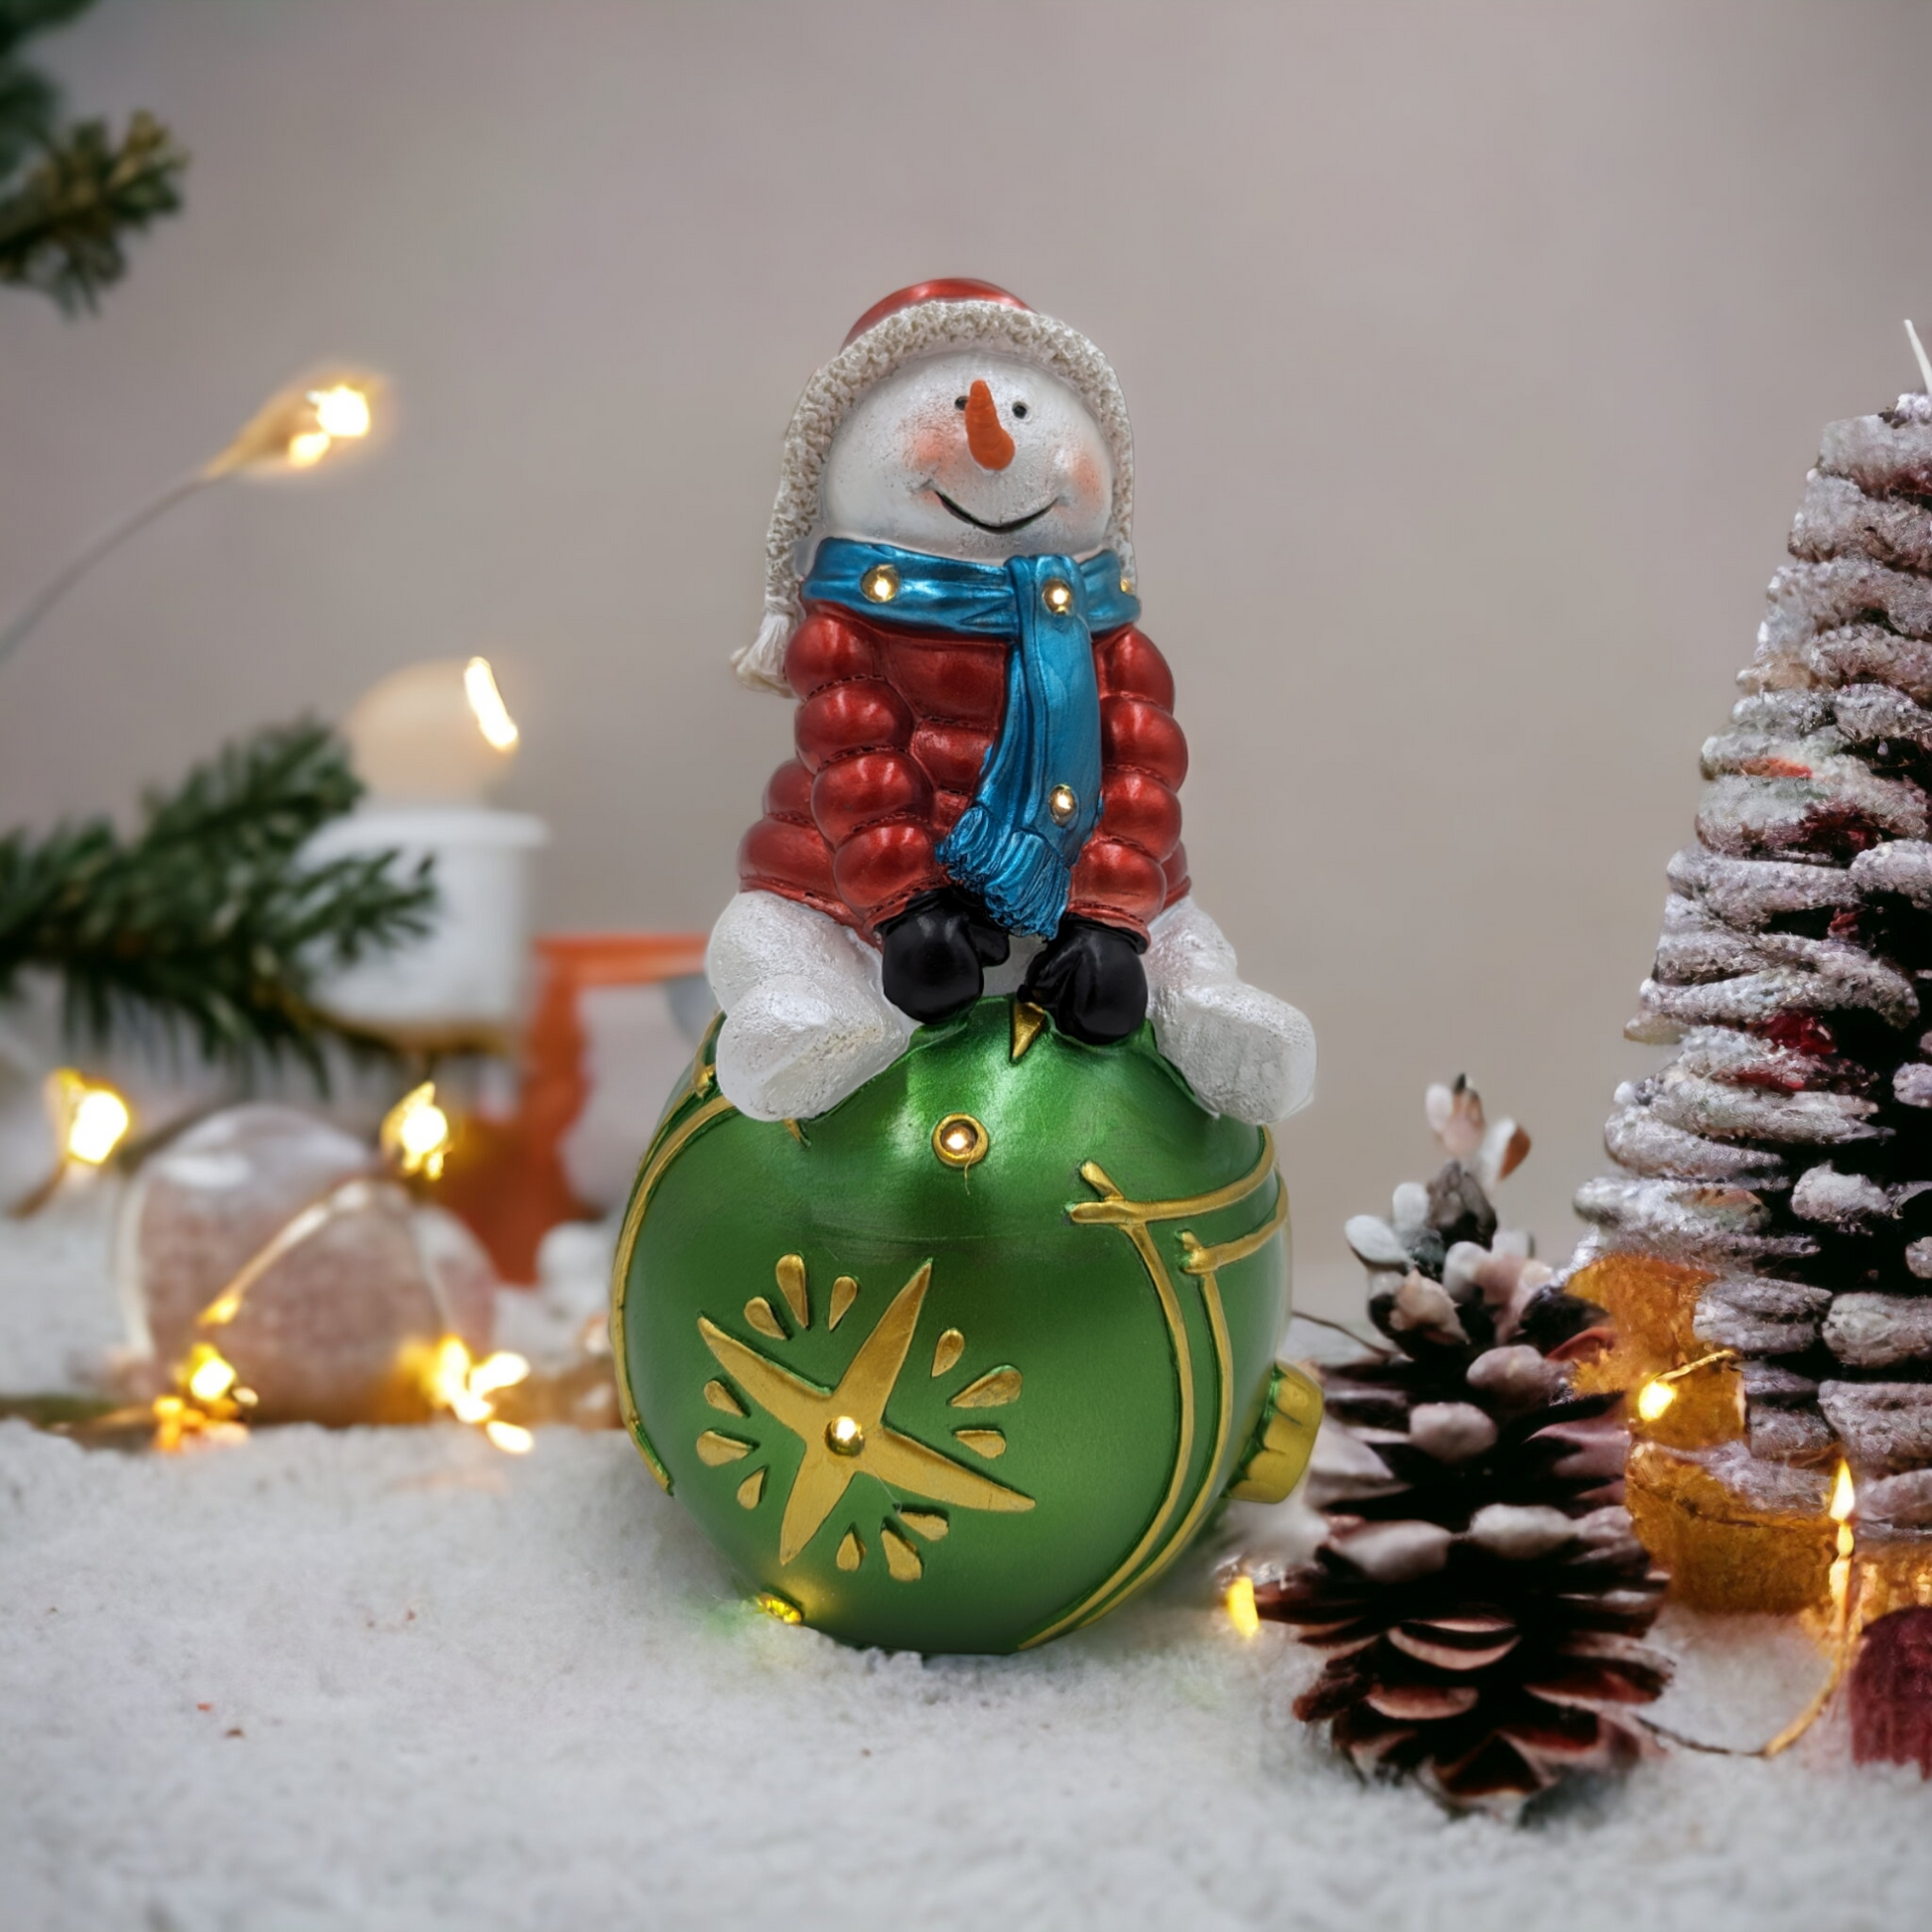 24cm Snowman on Bauble Decoration with LED Lights